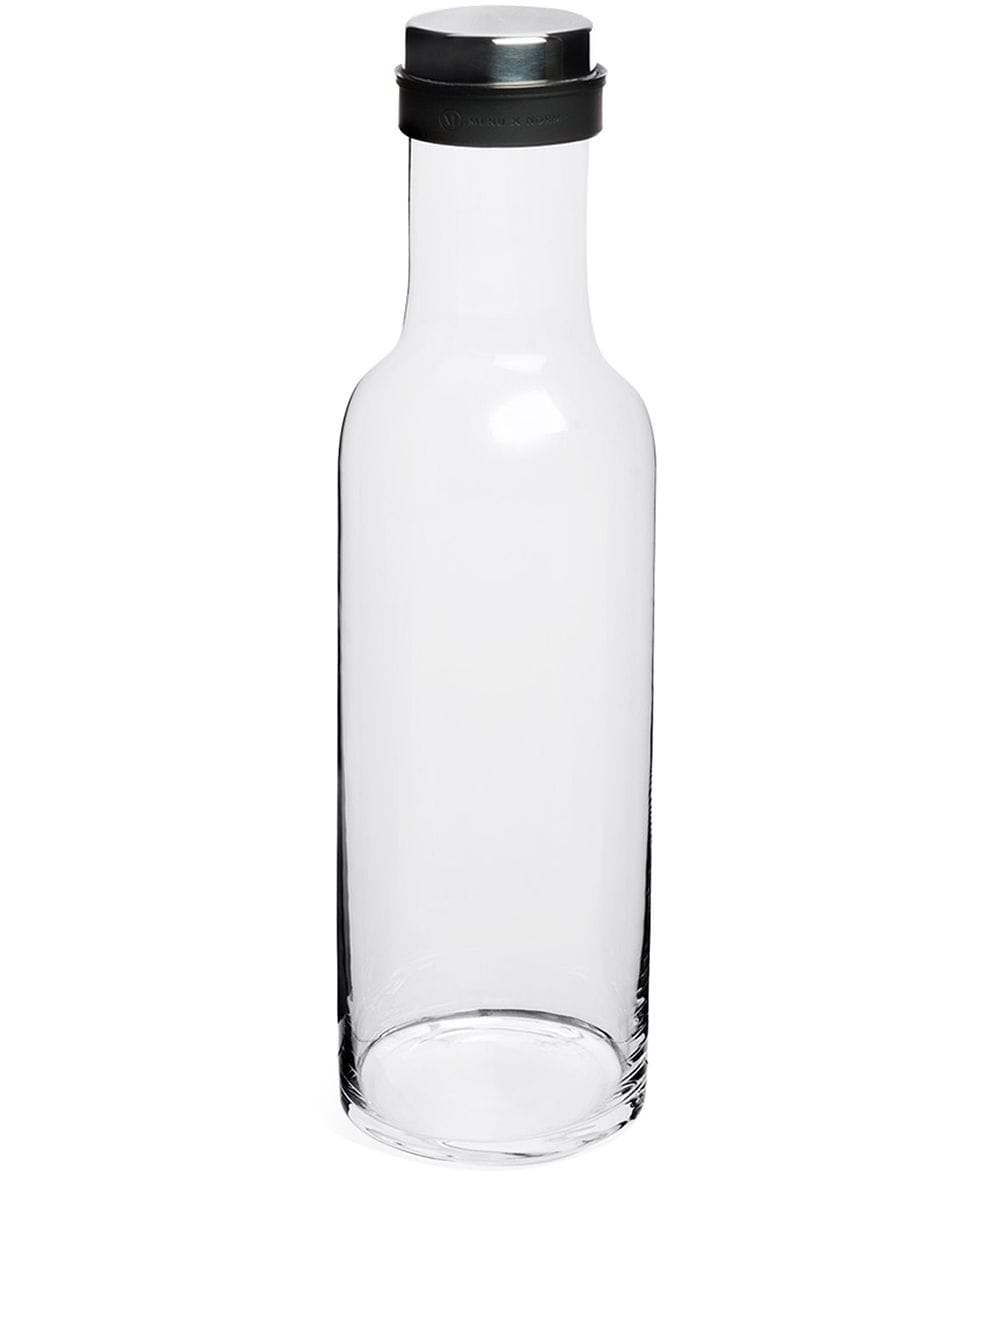 Image 1 of Audo tall glass bottle